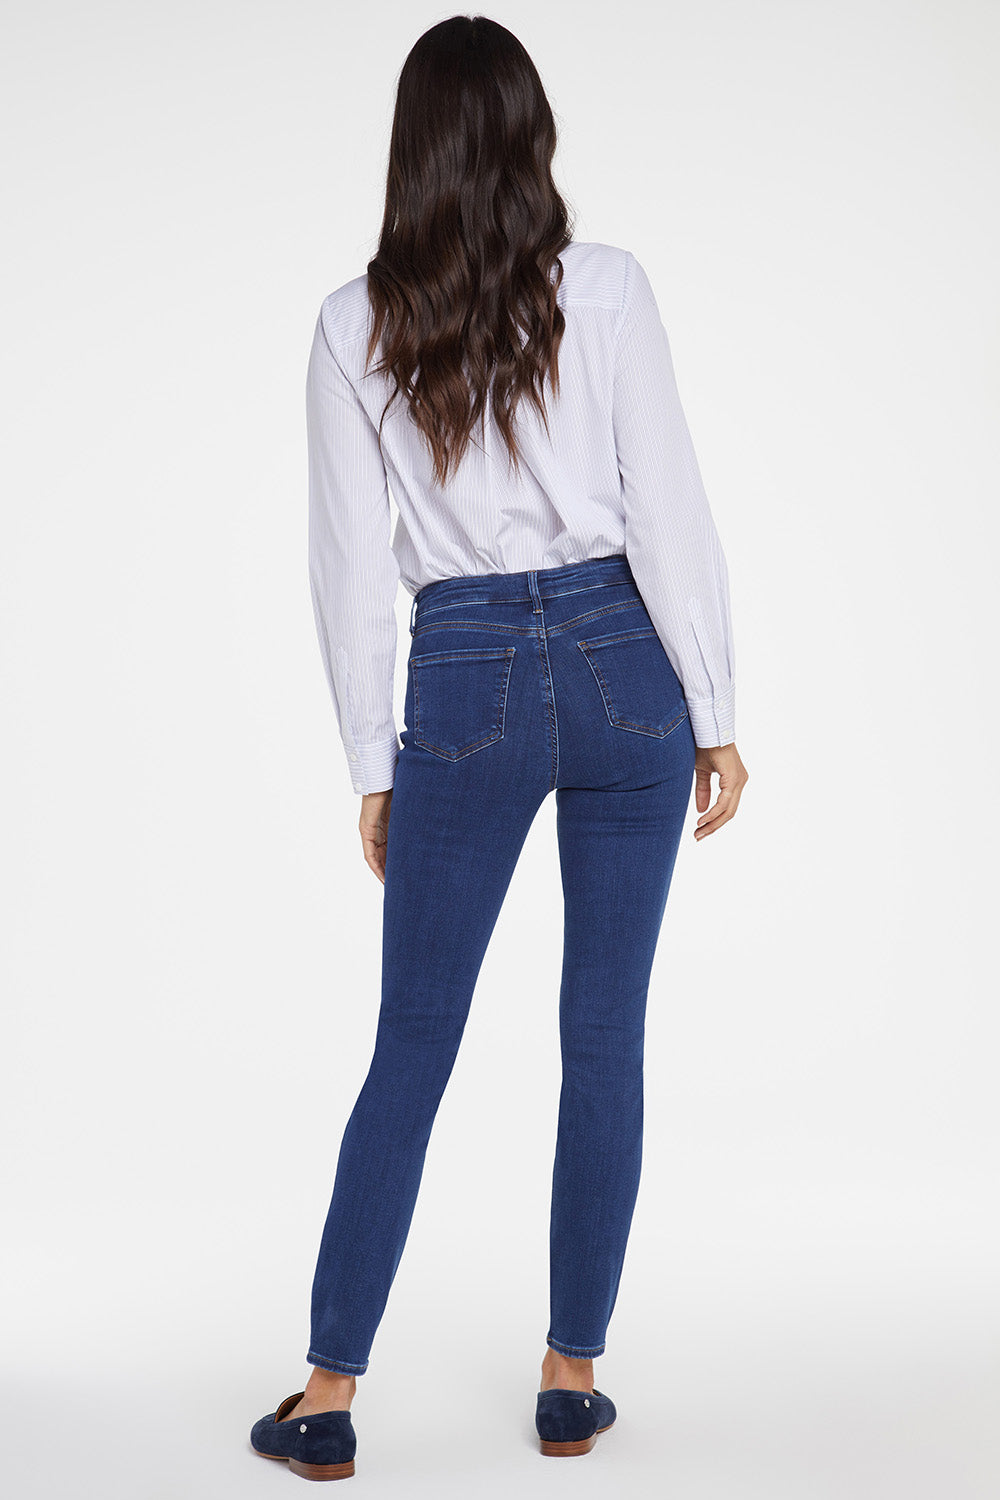 Ami Skinny Jeans In Tall With 36 Inseam - Quinn Blue